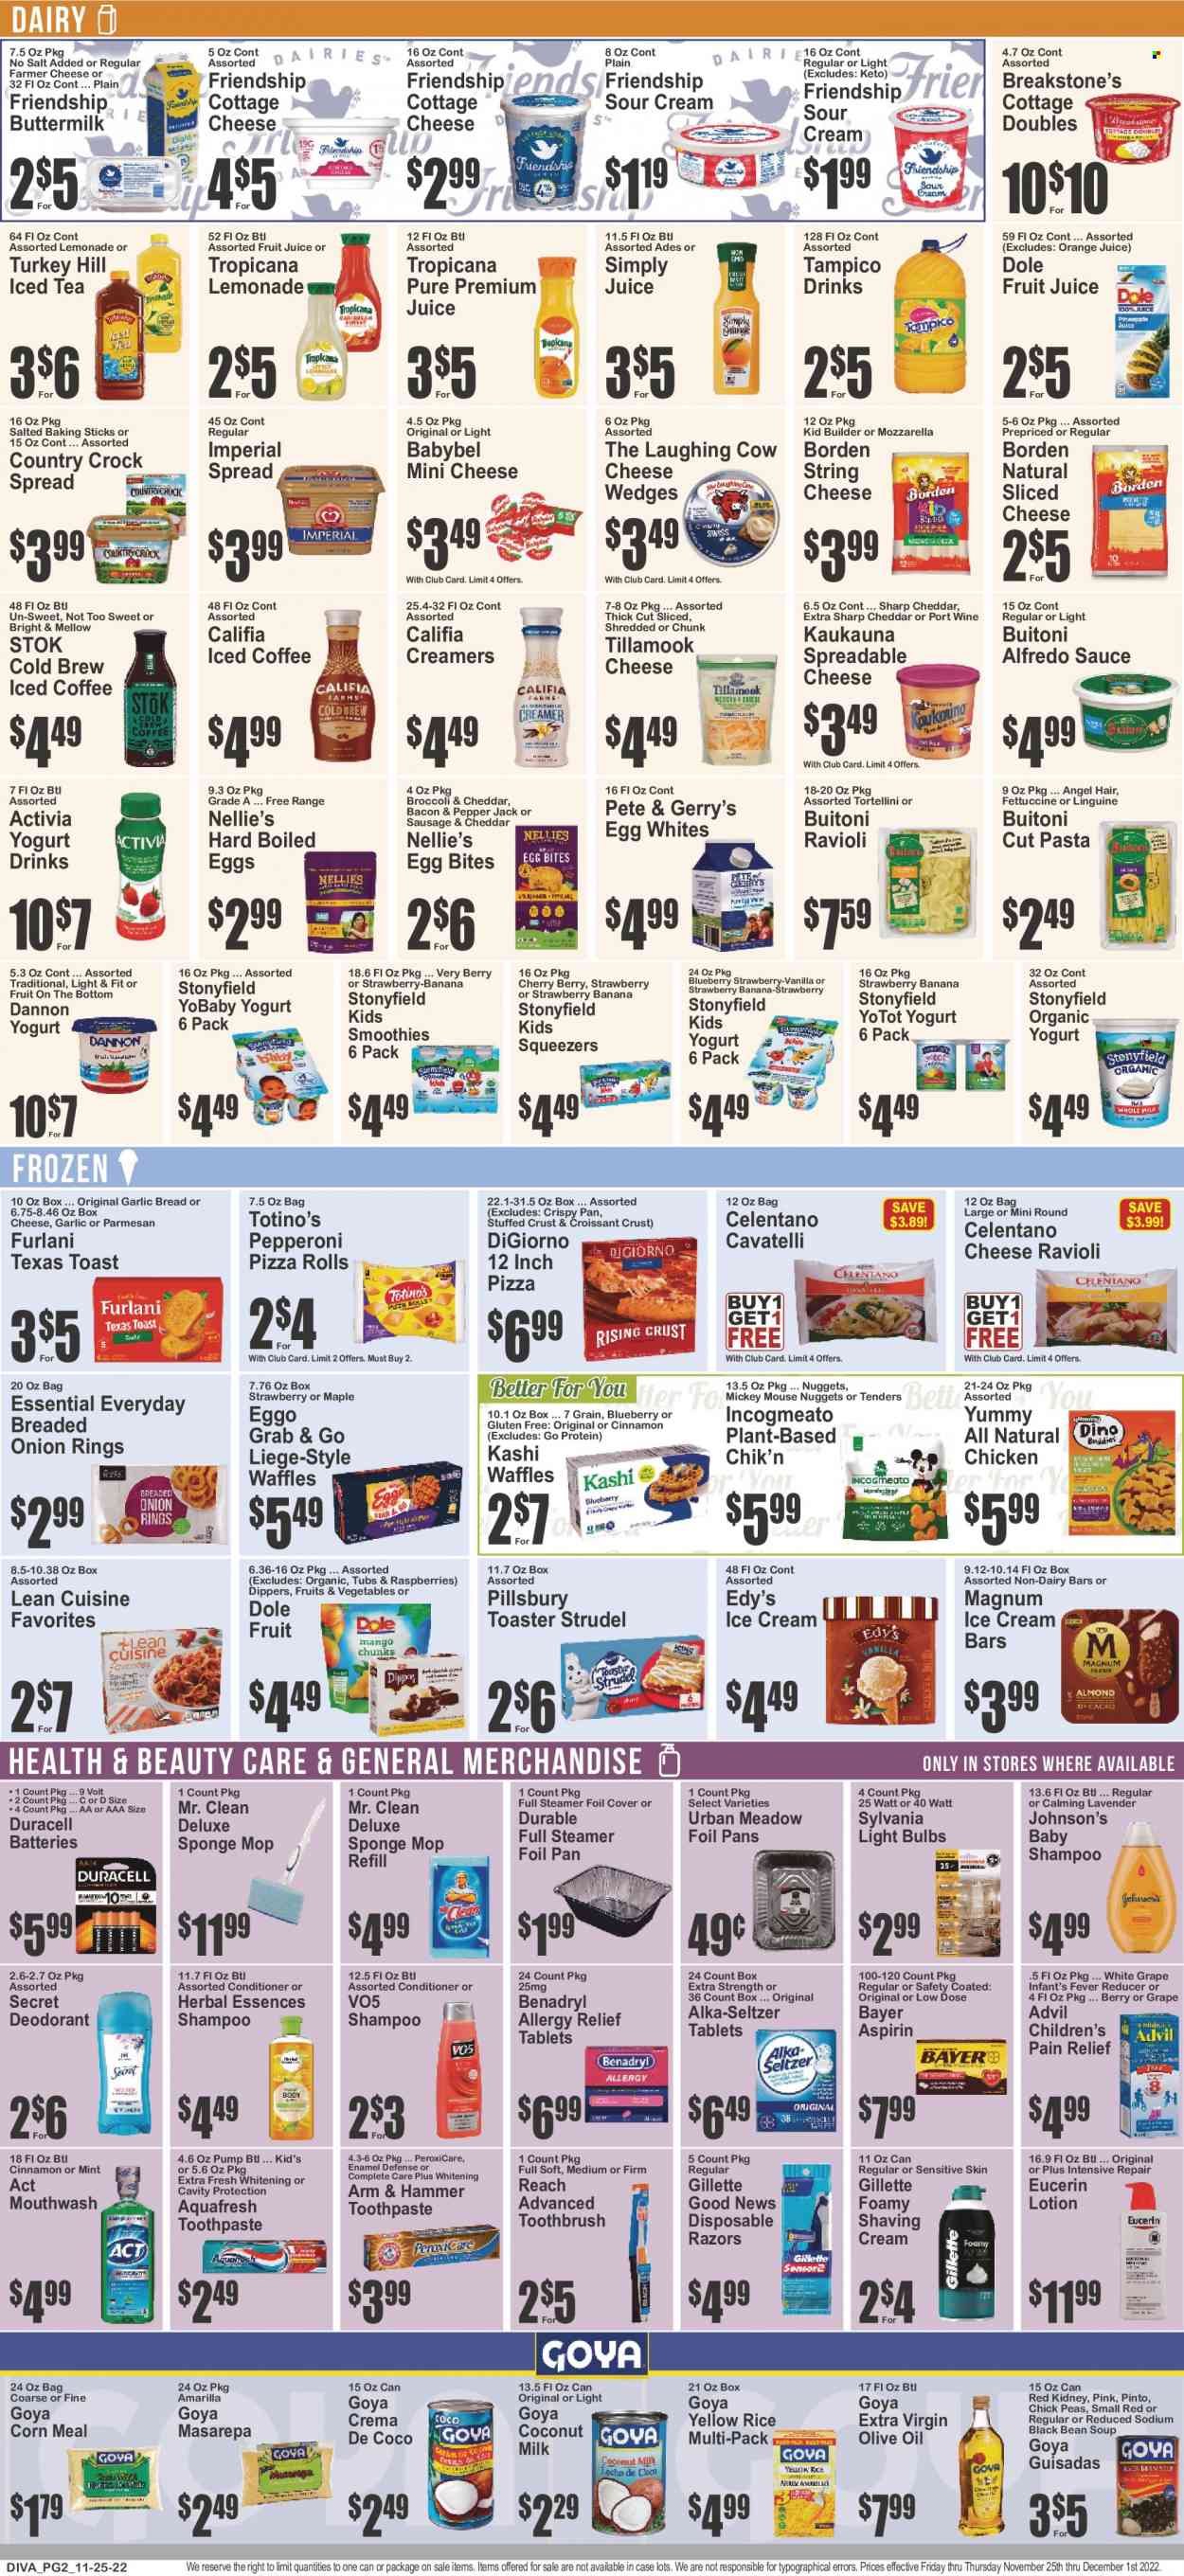 thumbnail - Brooklyn Fare Flyer - 11/25/2022 - 12/01/2022 - Sales products - bread, pizza rolls, croissant, strudel, waffles, broccoli, corn, Dole, cherries, ravioli, pizza, onion rings, soup, nuggets, pasta, sauce, tortellini, Pillsbury, Lean Cuisine, Alfredo sauce, Buitoni, bacon, sausage, pepperoni, cottage cheese, farmer cheese, sliced cheese, string cheese, parmesan, Pepper Jack cheese, The Laughing Cow, Babybel, yoghurt, organic yoghurt, Activia, Dannon, buttermilk, yoghurt drink, eggs, sour cream, ice cream, ice cream bars, Mickey Mouse, ARM & HAMMER, coconut milk, Goya, cinnamon, extra virgin olive oil, olive oil, oil, lemonade, orange juice, juice, fruit juice, ice tea, fruit punch, smoothie, iced coffee, port wine, Johnson's, shampoo, toothbrush, toothpaste, mouthwash, conditioner, Herbal Essences, VO5, body lotion, Eucerin, anti-perspirant, deodorant, Gillette, disposable razor, mop pad, pan, battery, bulb, Duracell, light bulb, Sylvania, pain relief, Advil Rapid, Alka-seltzer, Low Dose, aspirin, Bayer, allergy relief. Page 2.